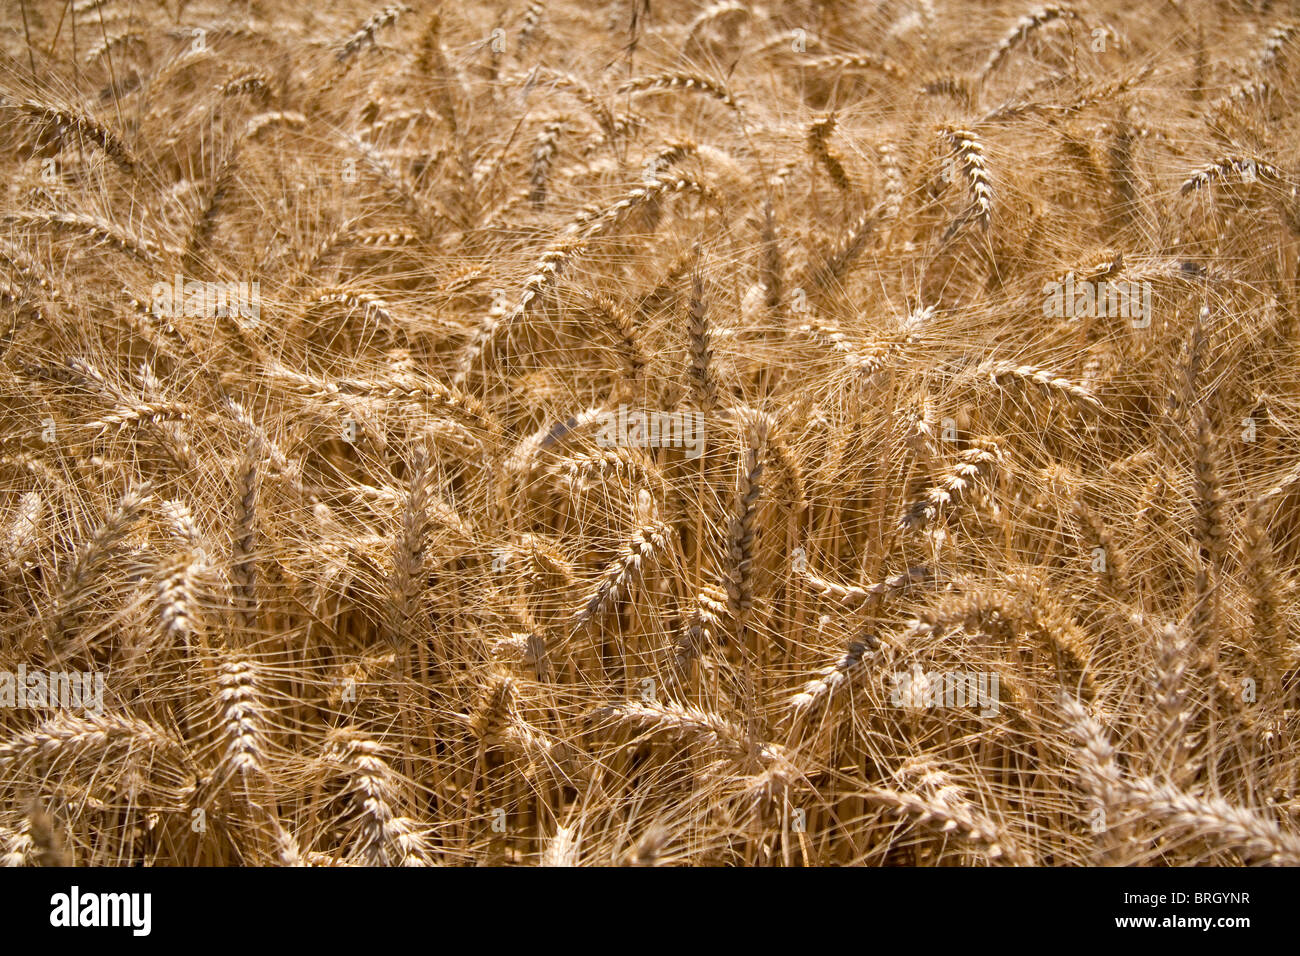 Crop of ripe wheat in the Willamette Valley of Oregon, USA. Stock Photo